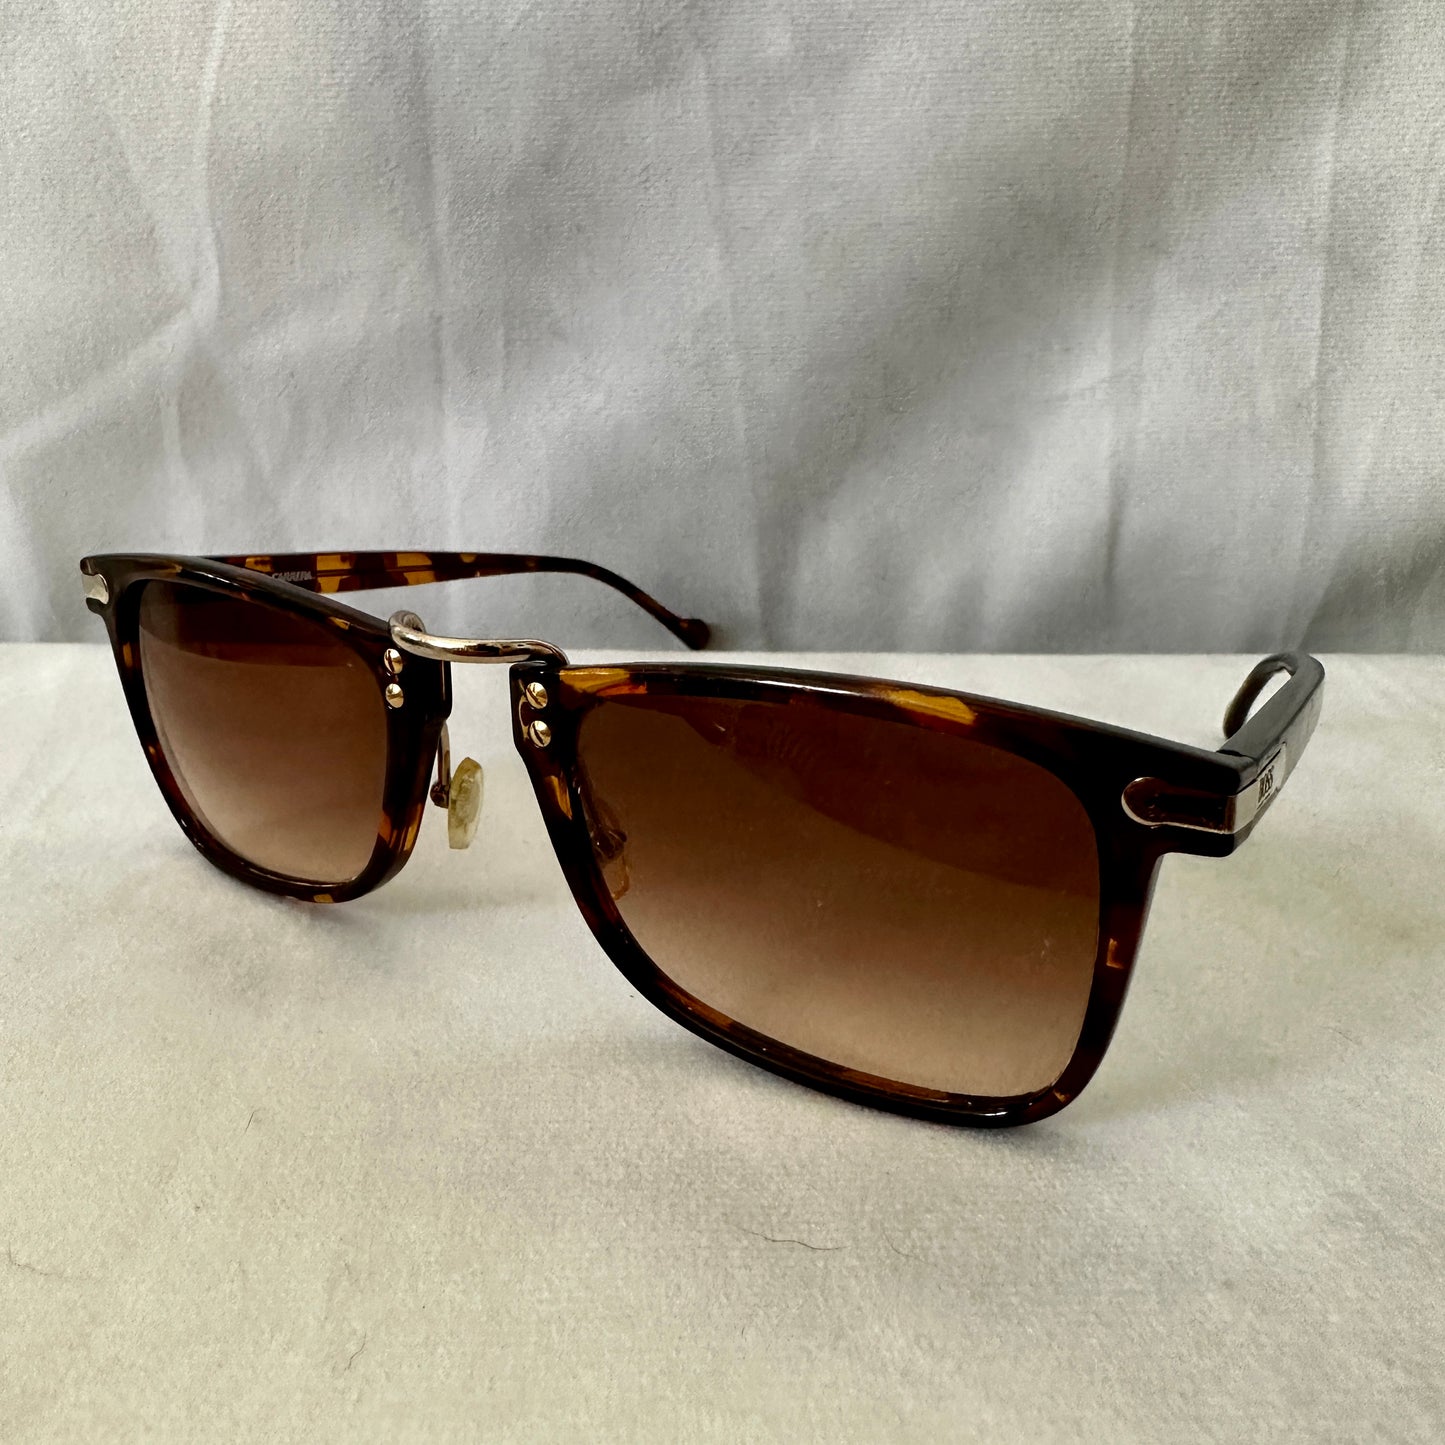 Boss by Carrera 5168 Vintage 80s Sunglasses - Made in Austria